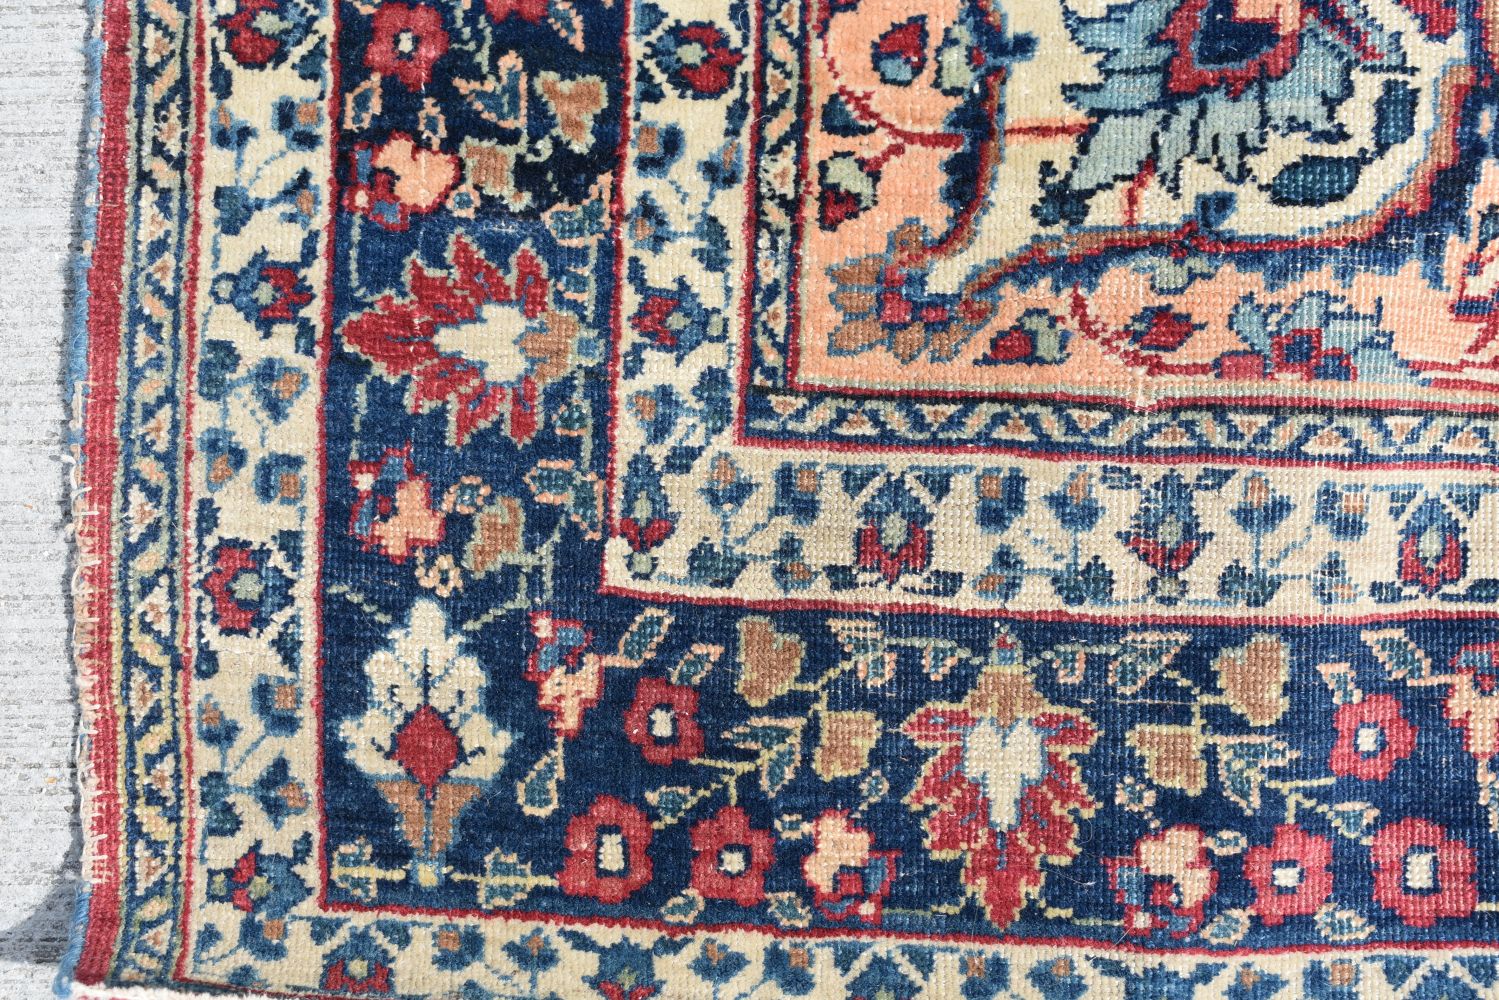 A Persian rug 189 x 122 cm - Image 9 of 14